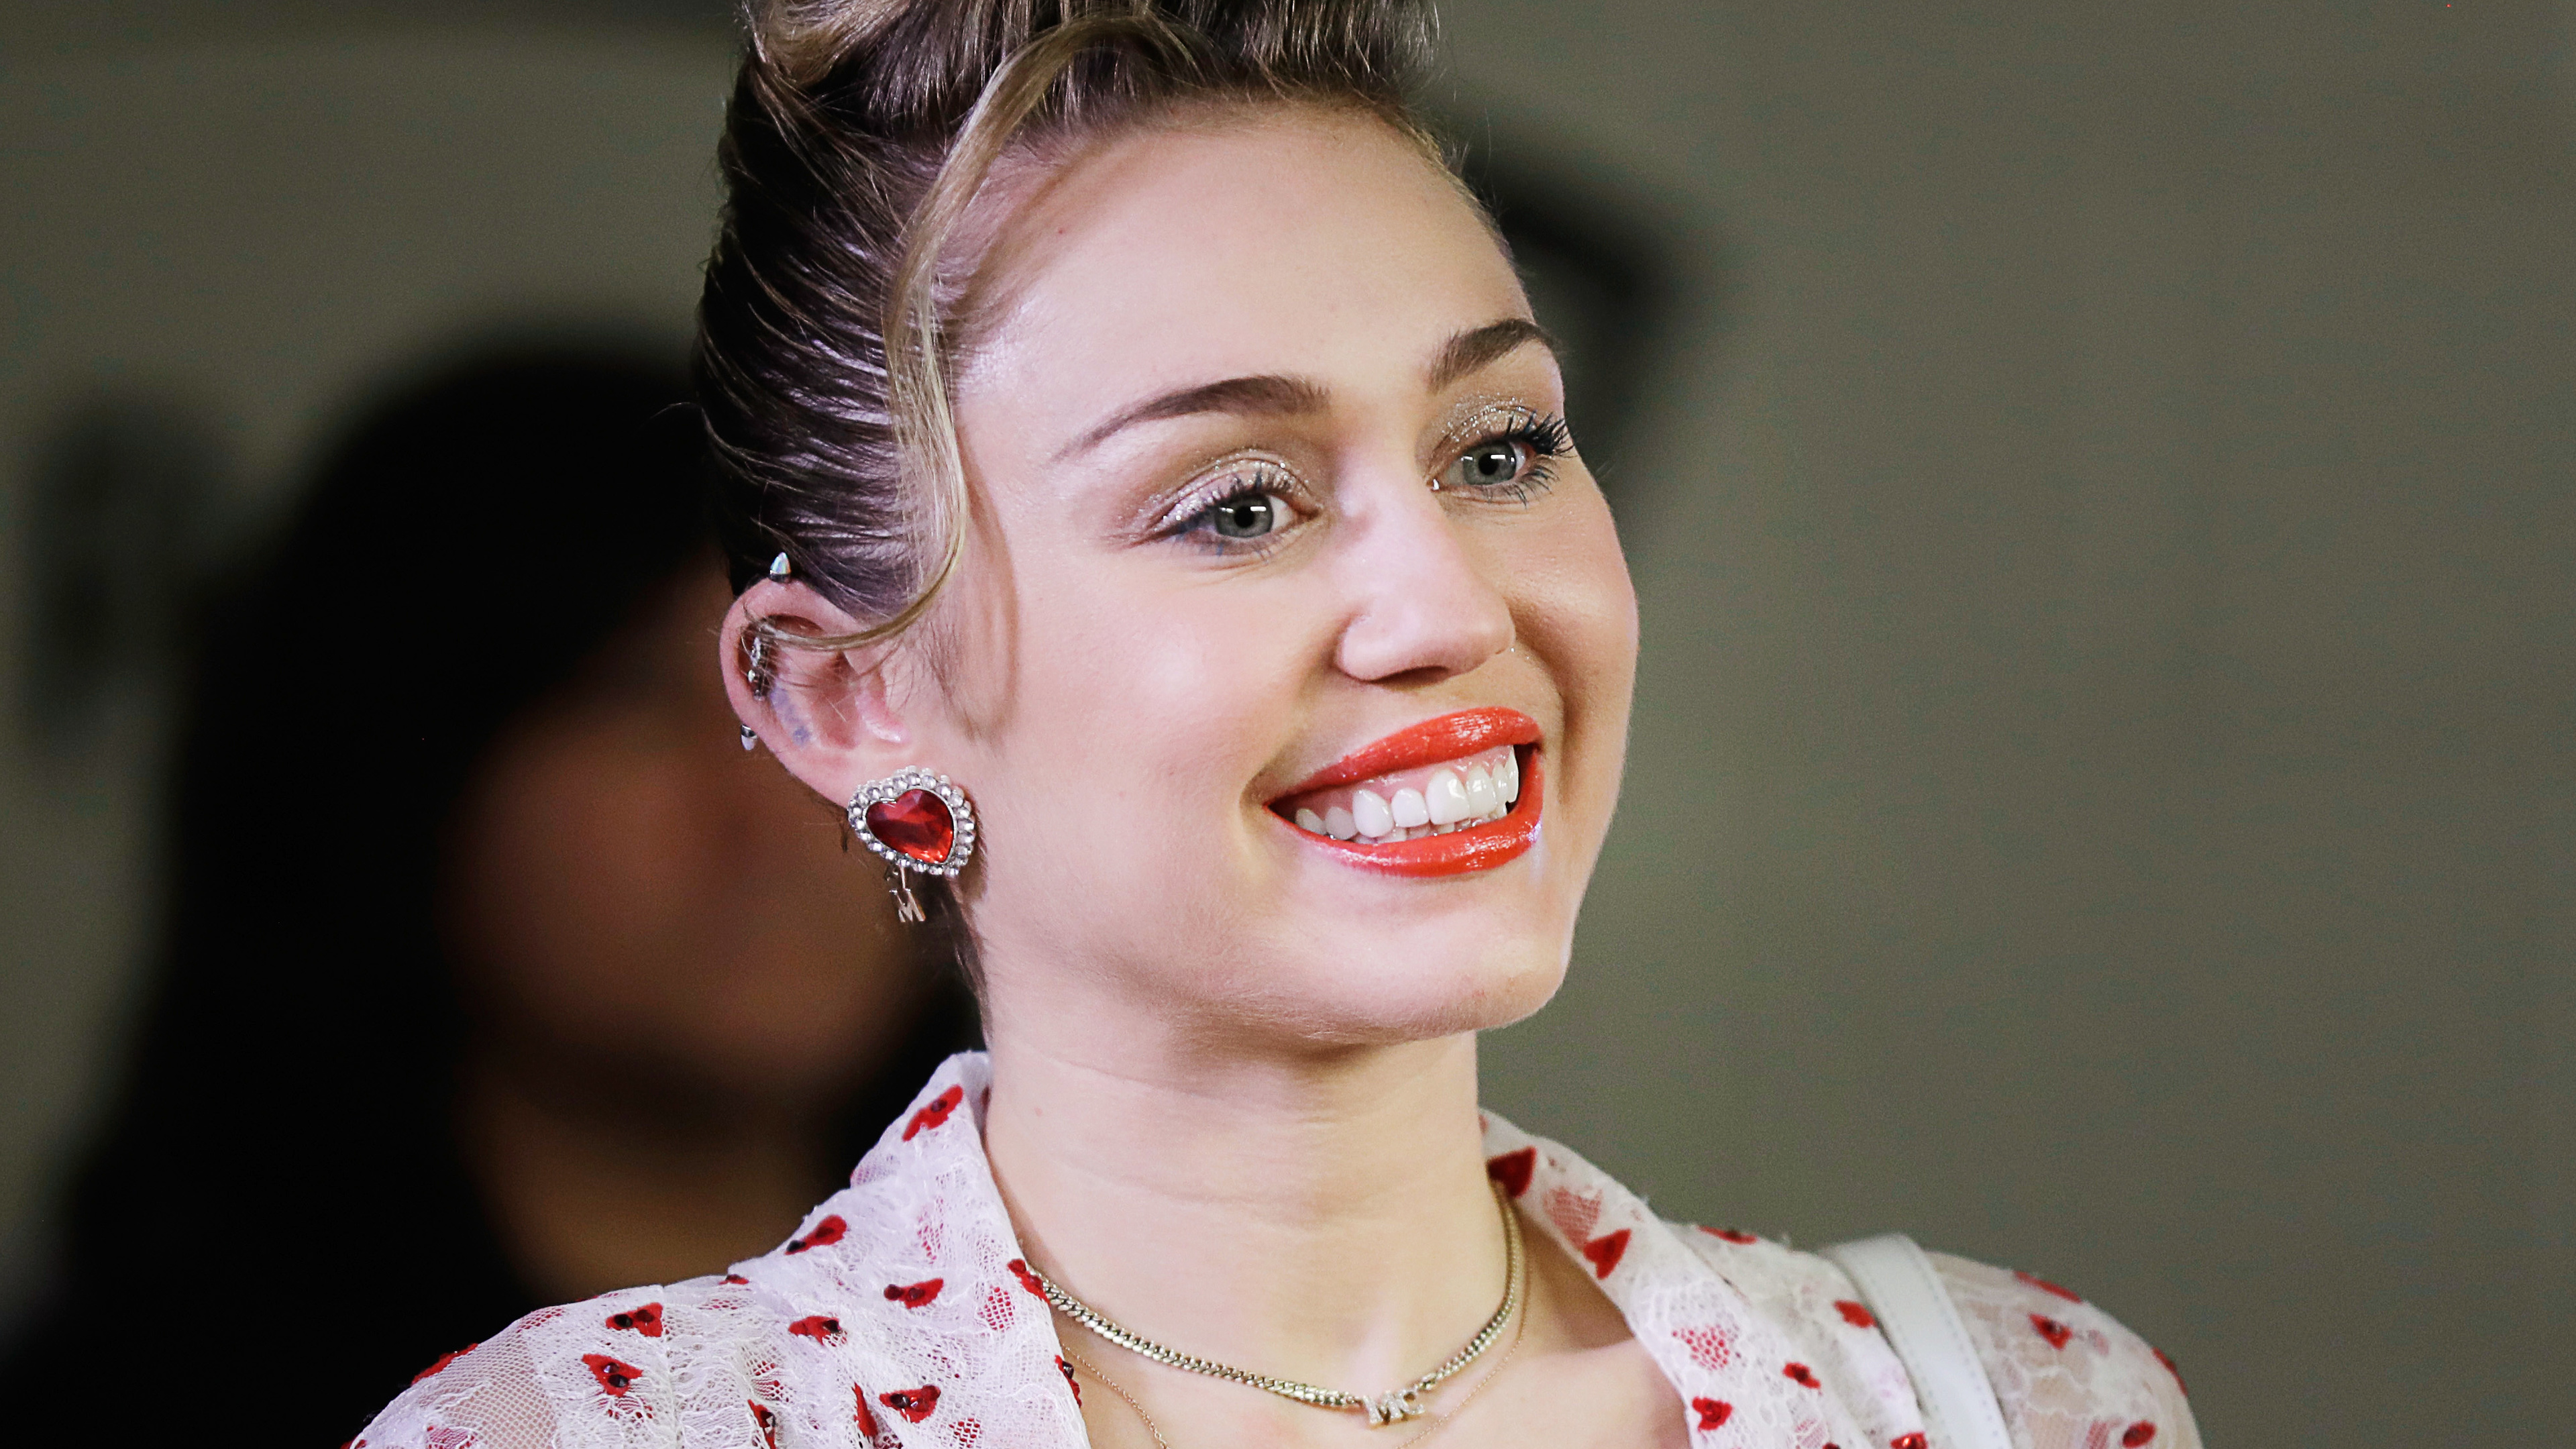 Miley Cyrus Wallpapers  Top 25 Best Miley Cyrus Wallpapers  HQ 